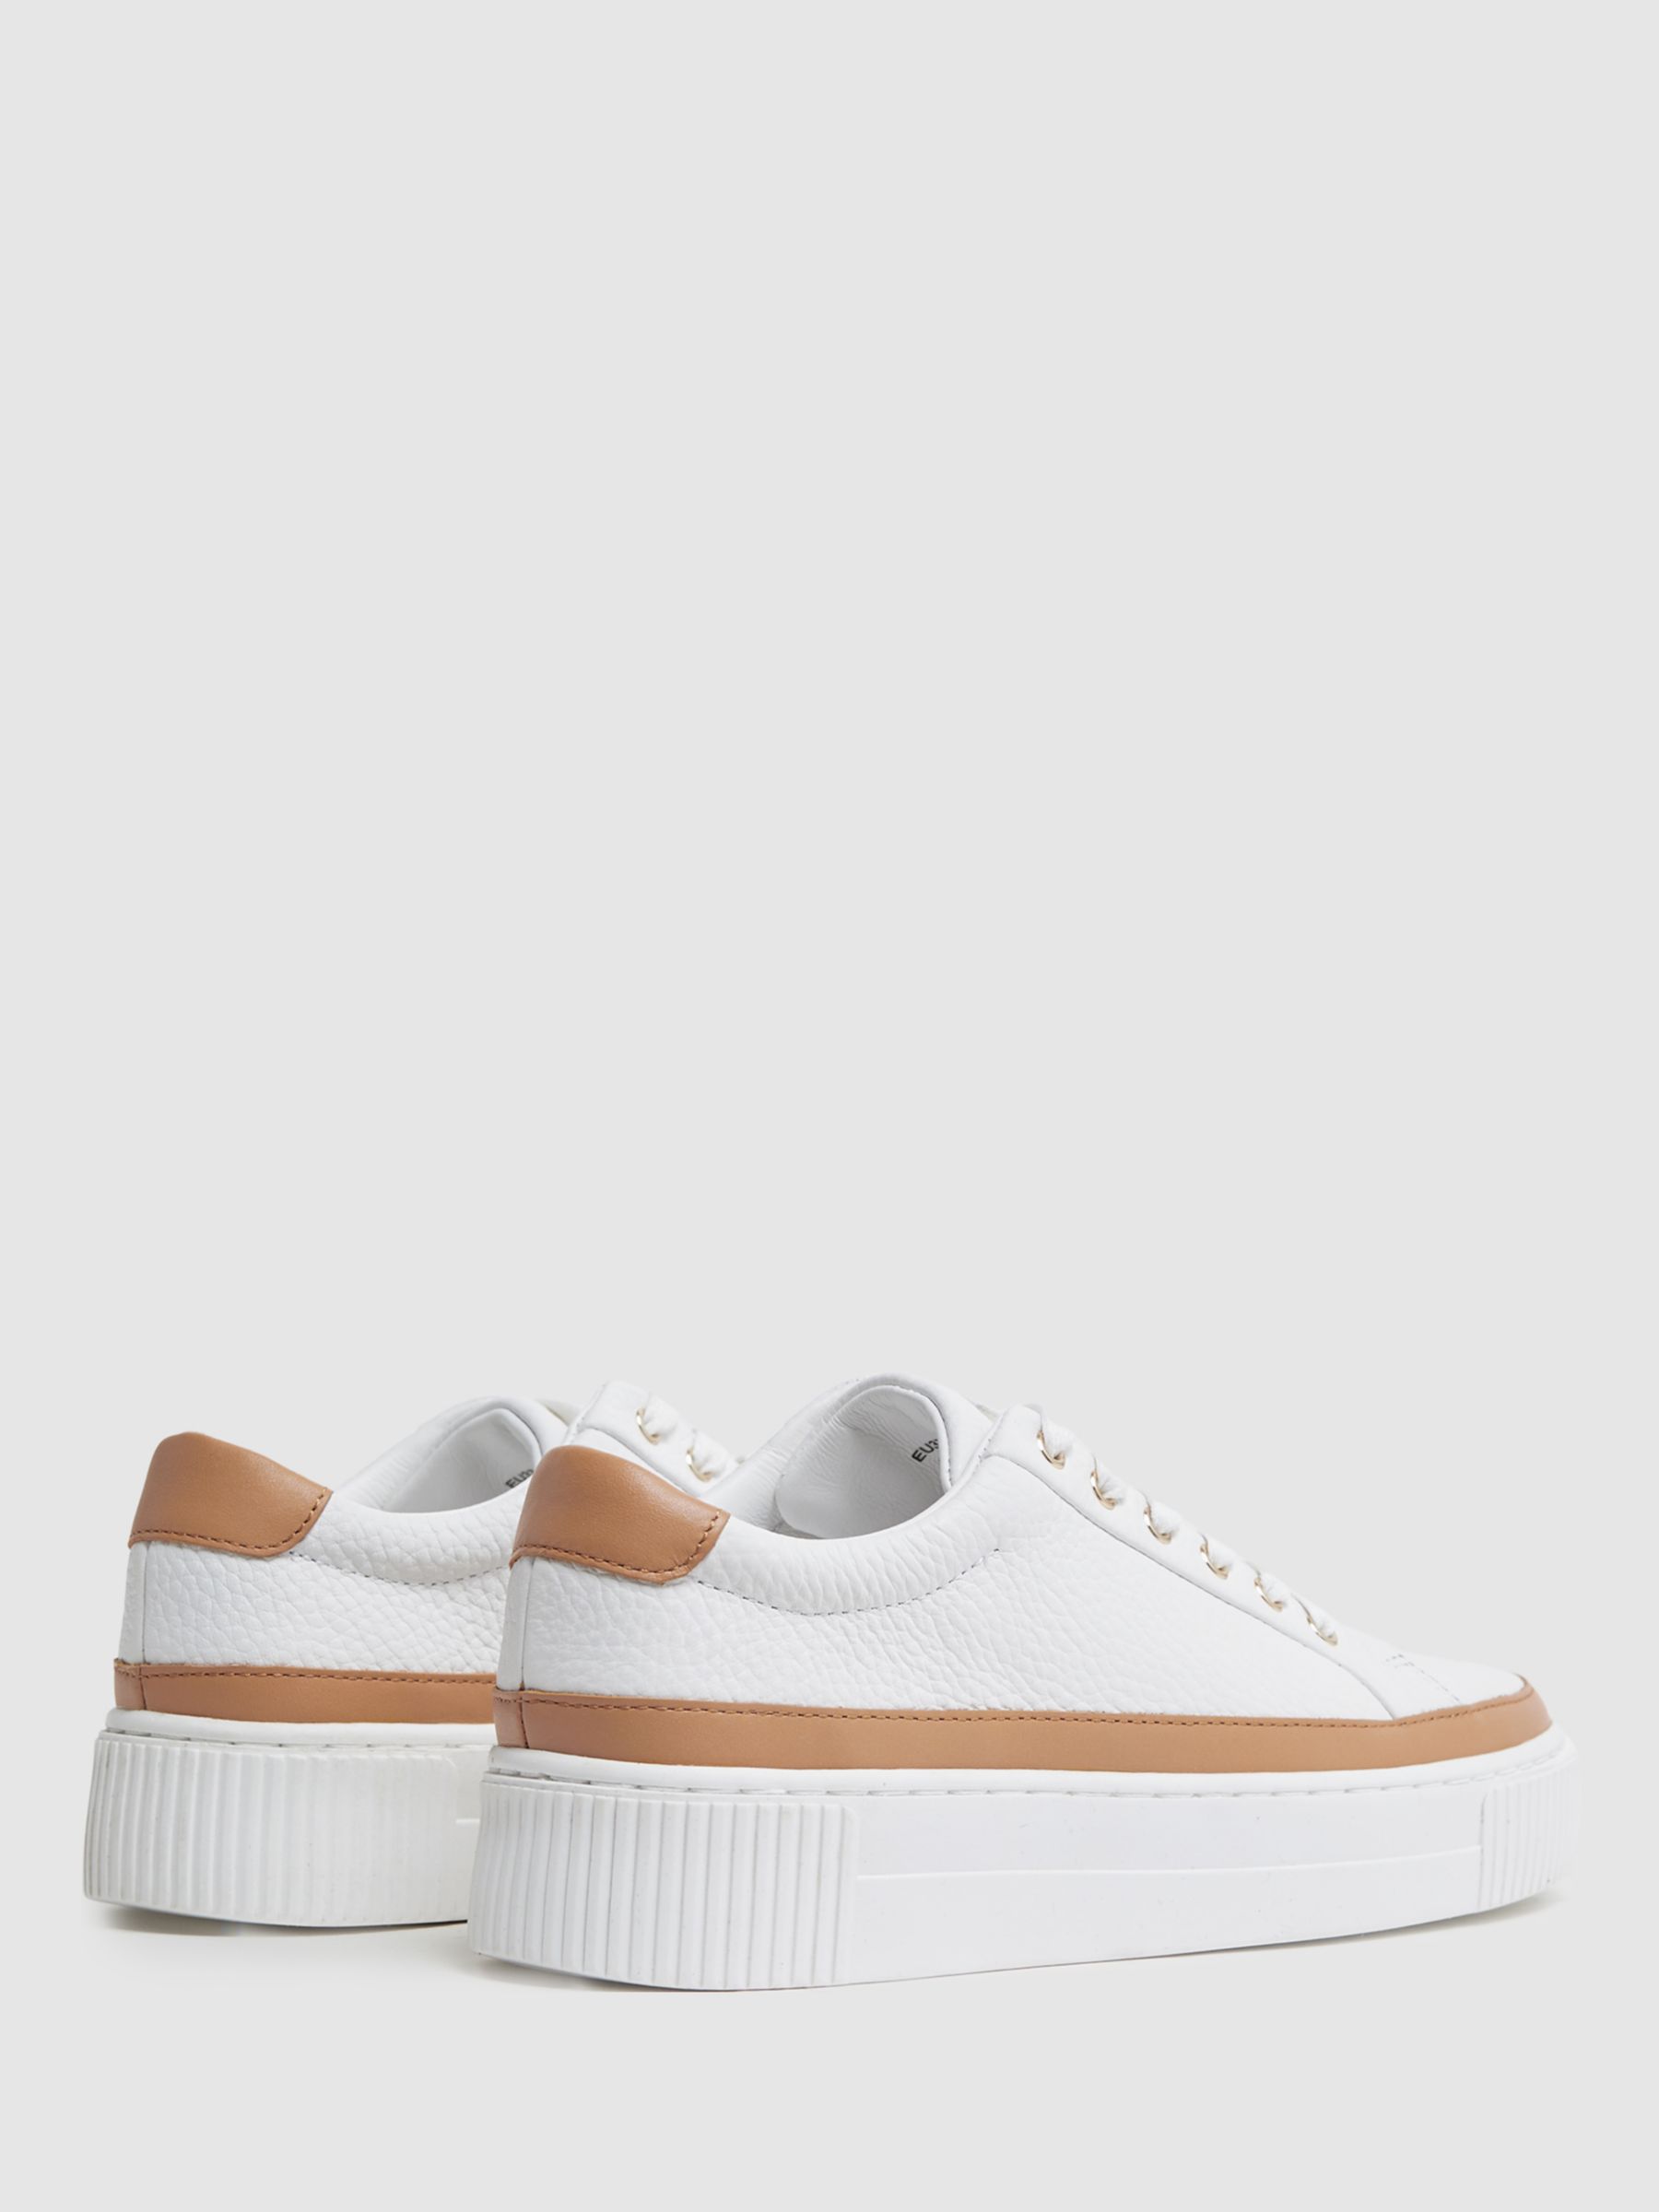 Reiss Leanne Leather Low Top Trainers, Camel/White at John Lewis & Partners